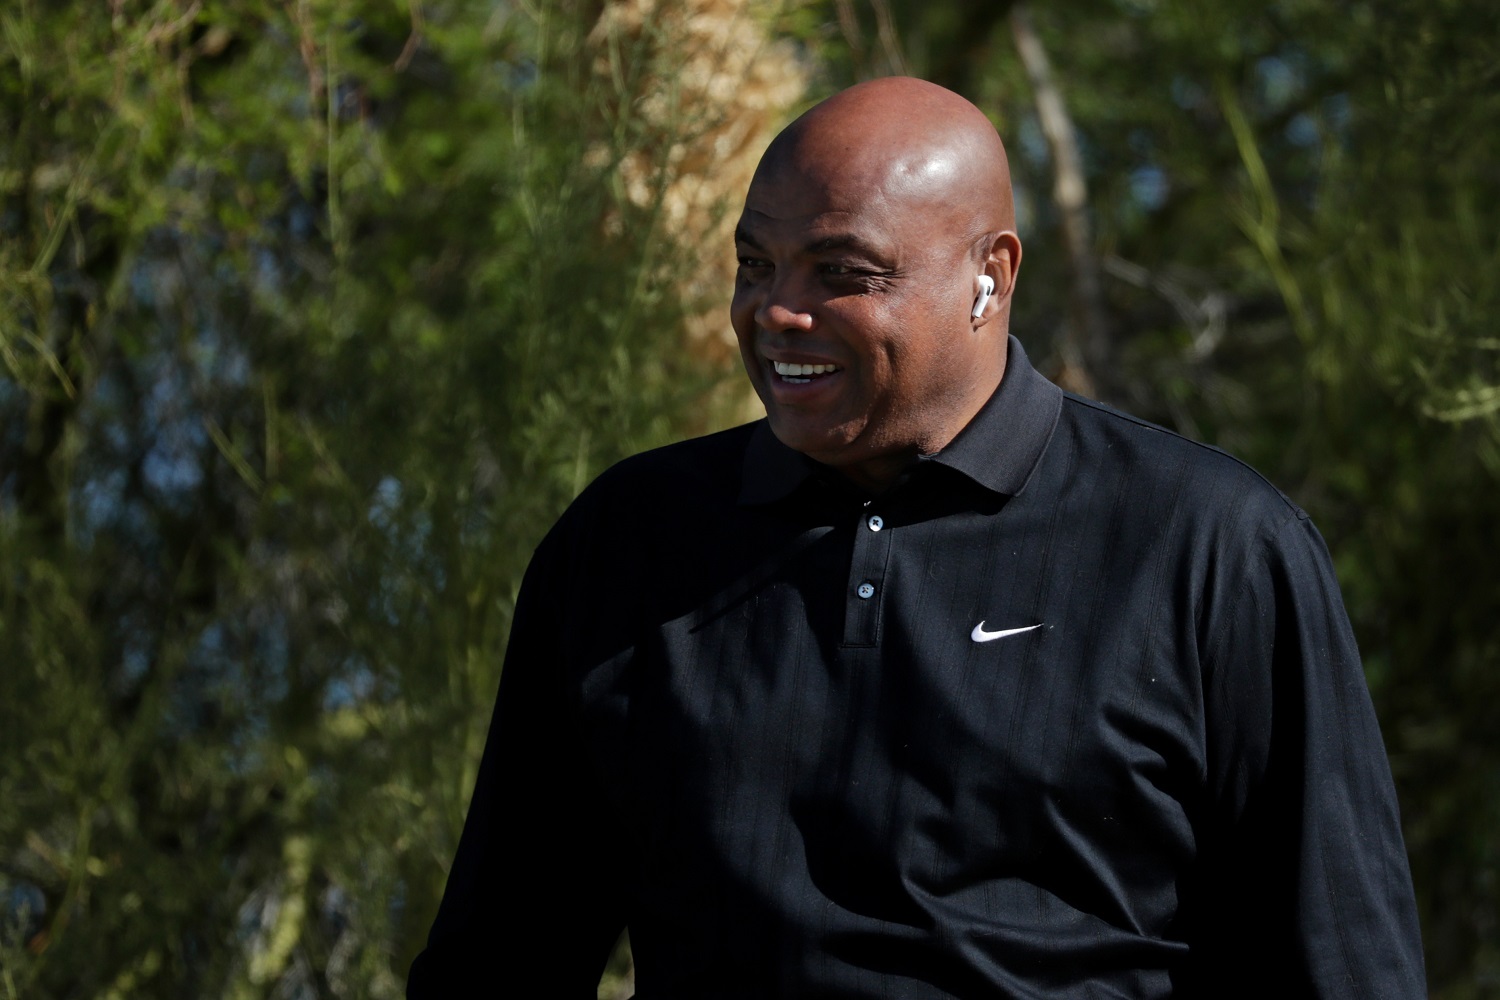 Charles Barkley looks on from the first tee during Capital One's The Match: Champions For Change at Stone Canyon Golf Club on Nov. 27, 2020, in Oro Valley, Arizona.